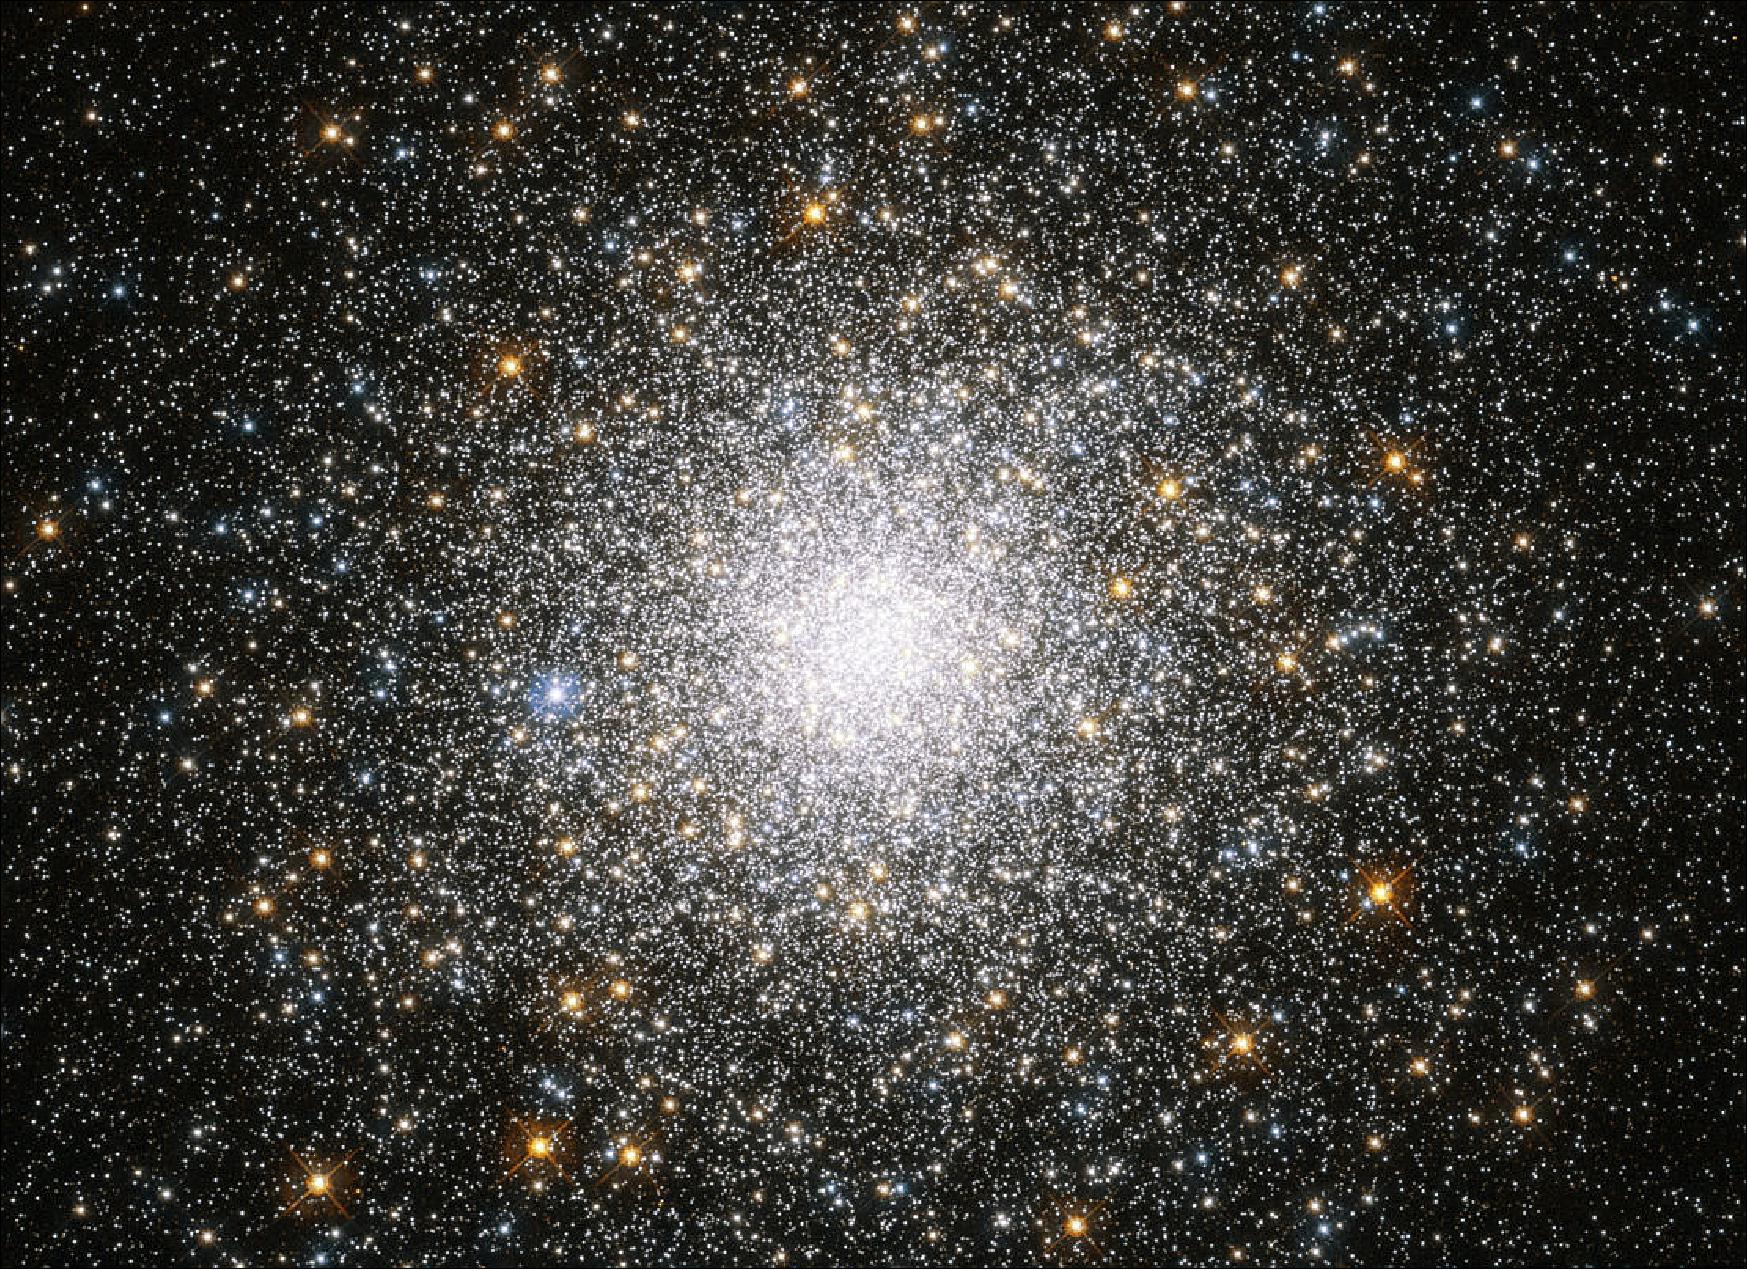 Figure 54: This sparkling burst of stars is Messier 75. It is a globular cluster: a spherical collection of stars bound together by gravity. Clusters like this orbit around galaxies and typically reside in their outer and less-crowded areas, gathering to form dense communities in the galactic suburbs (image credit: ESA/Hubble & NASA, F. Ferraro et al.; CC BY 4.0)